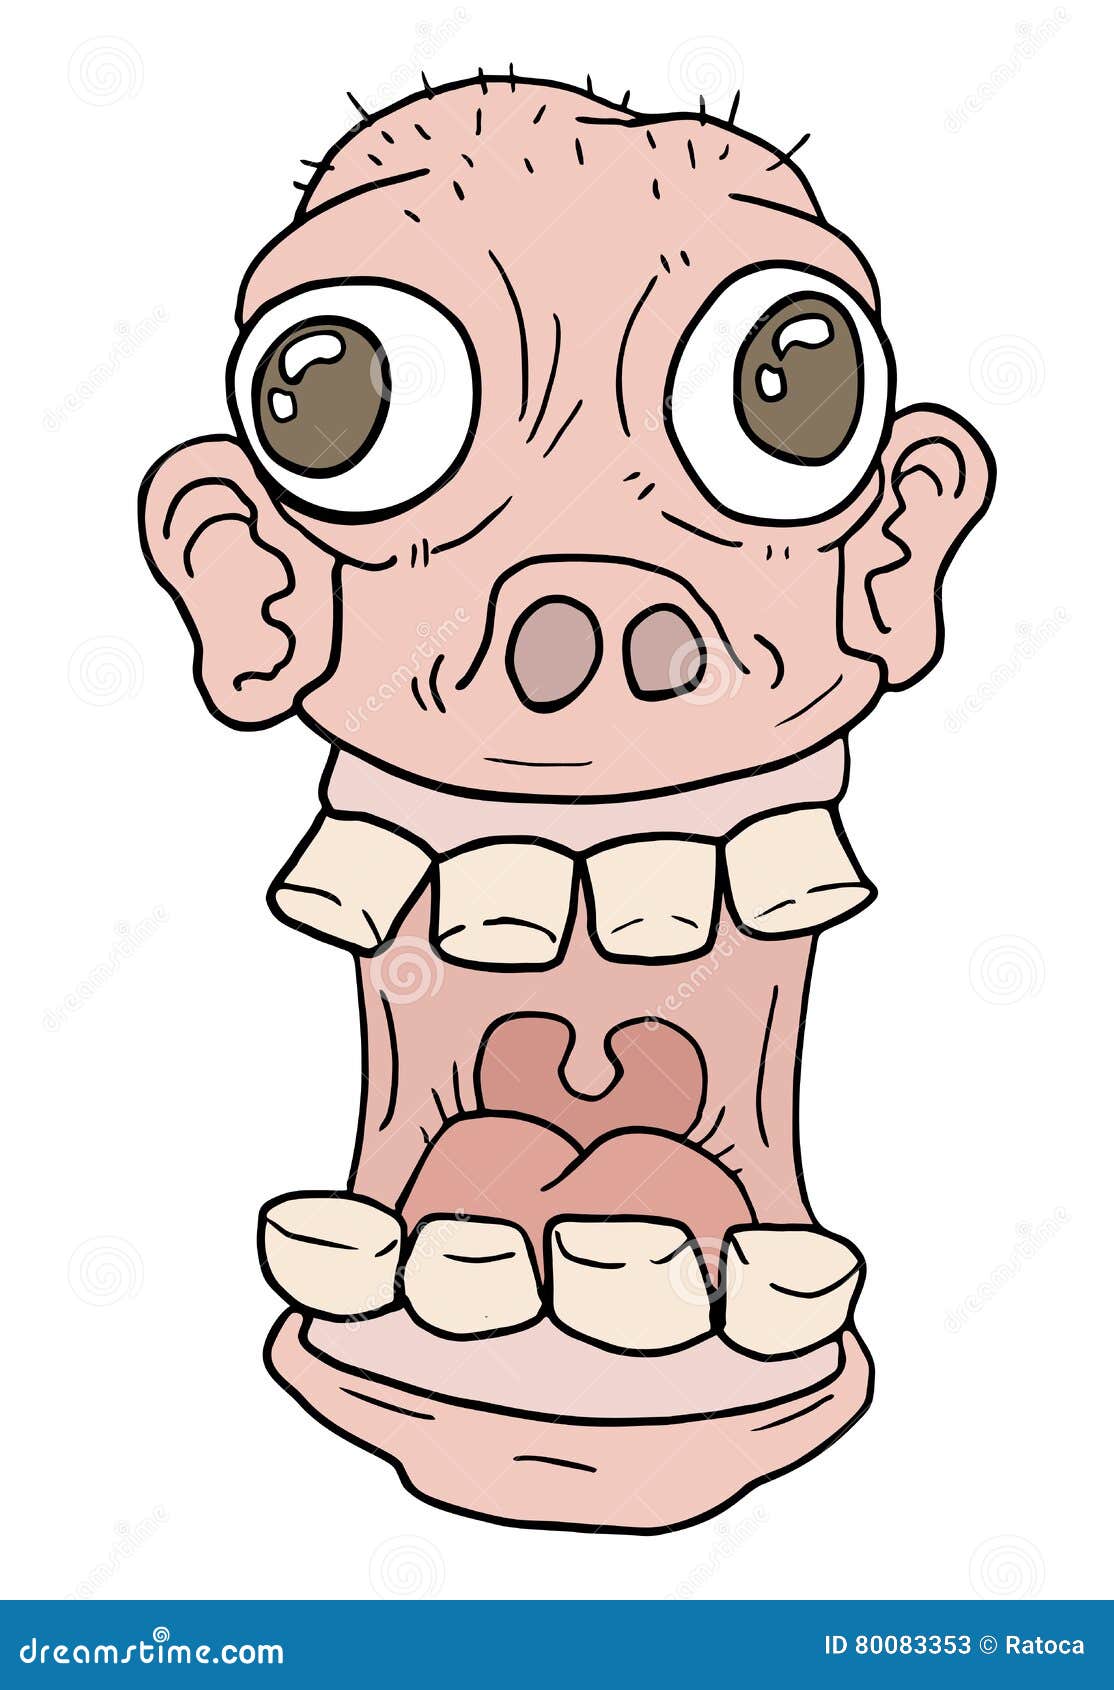 Ugly face stock vector. Illustration of ugly, expressive - 80083353